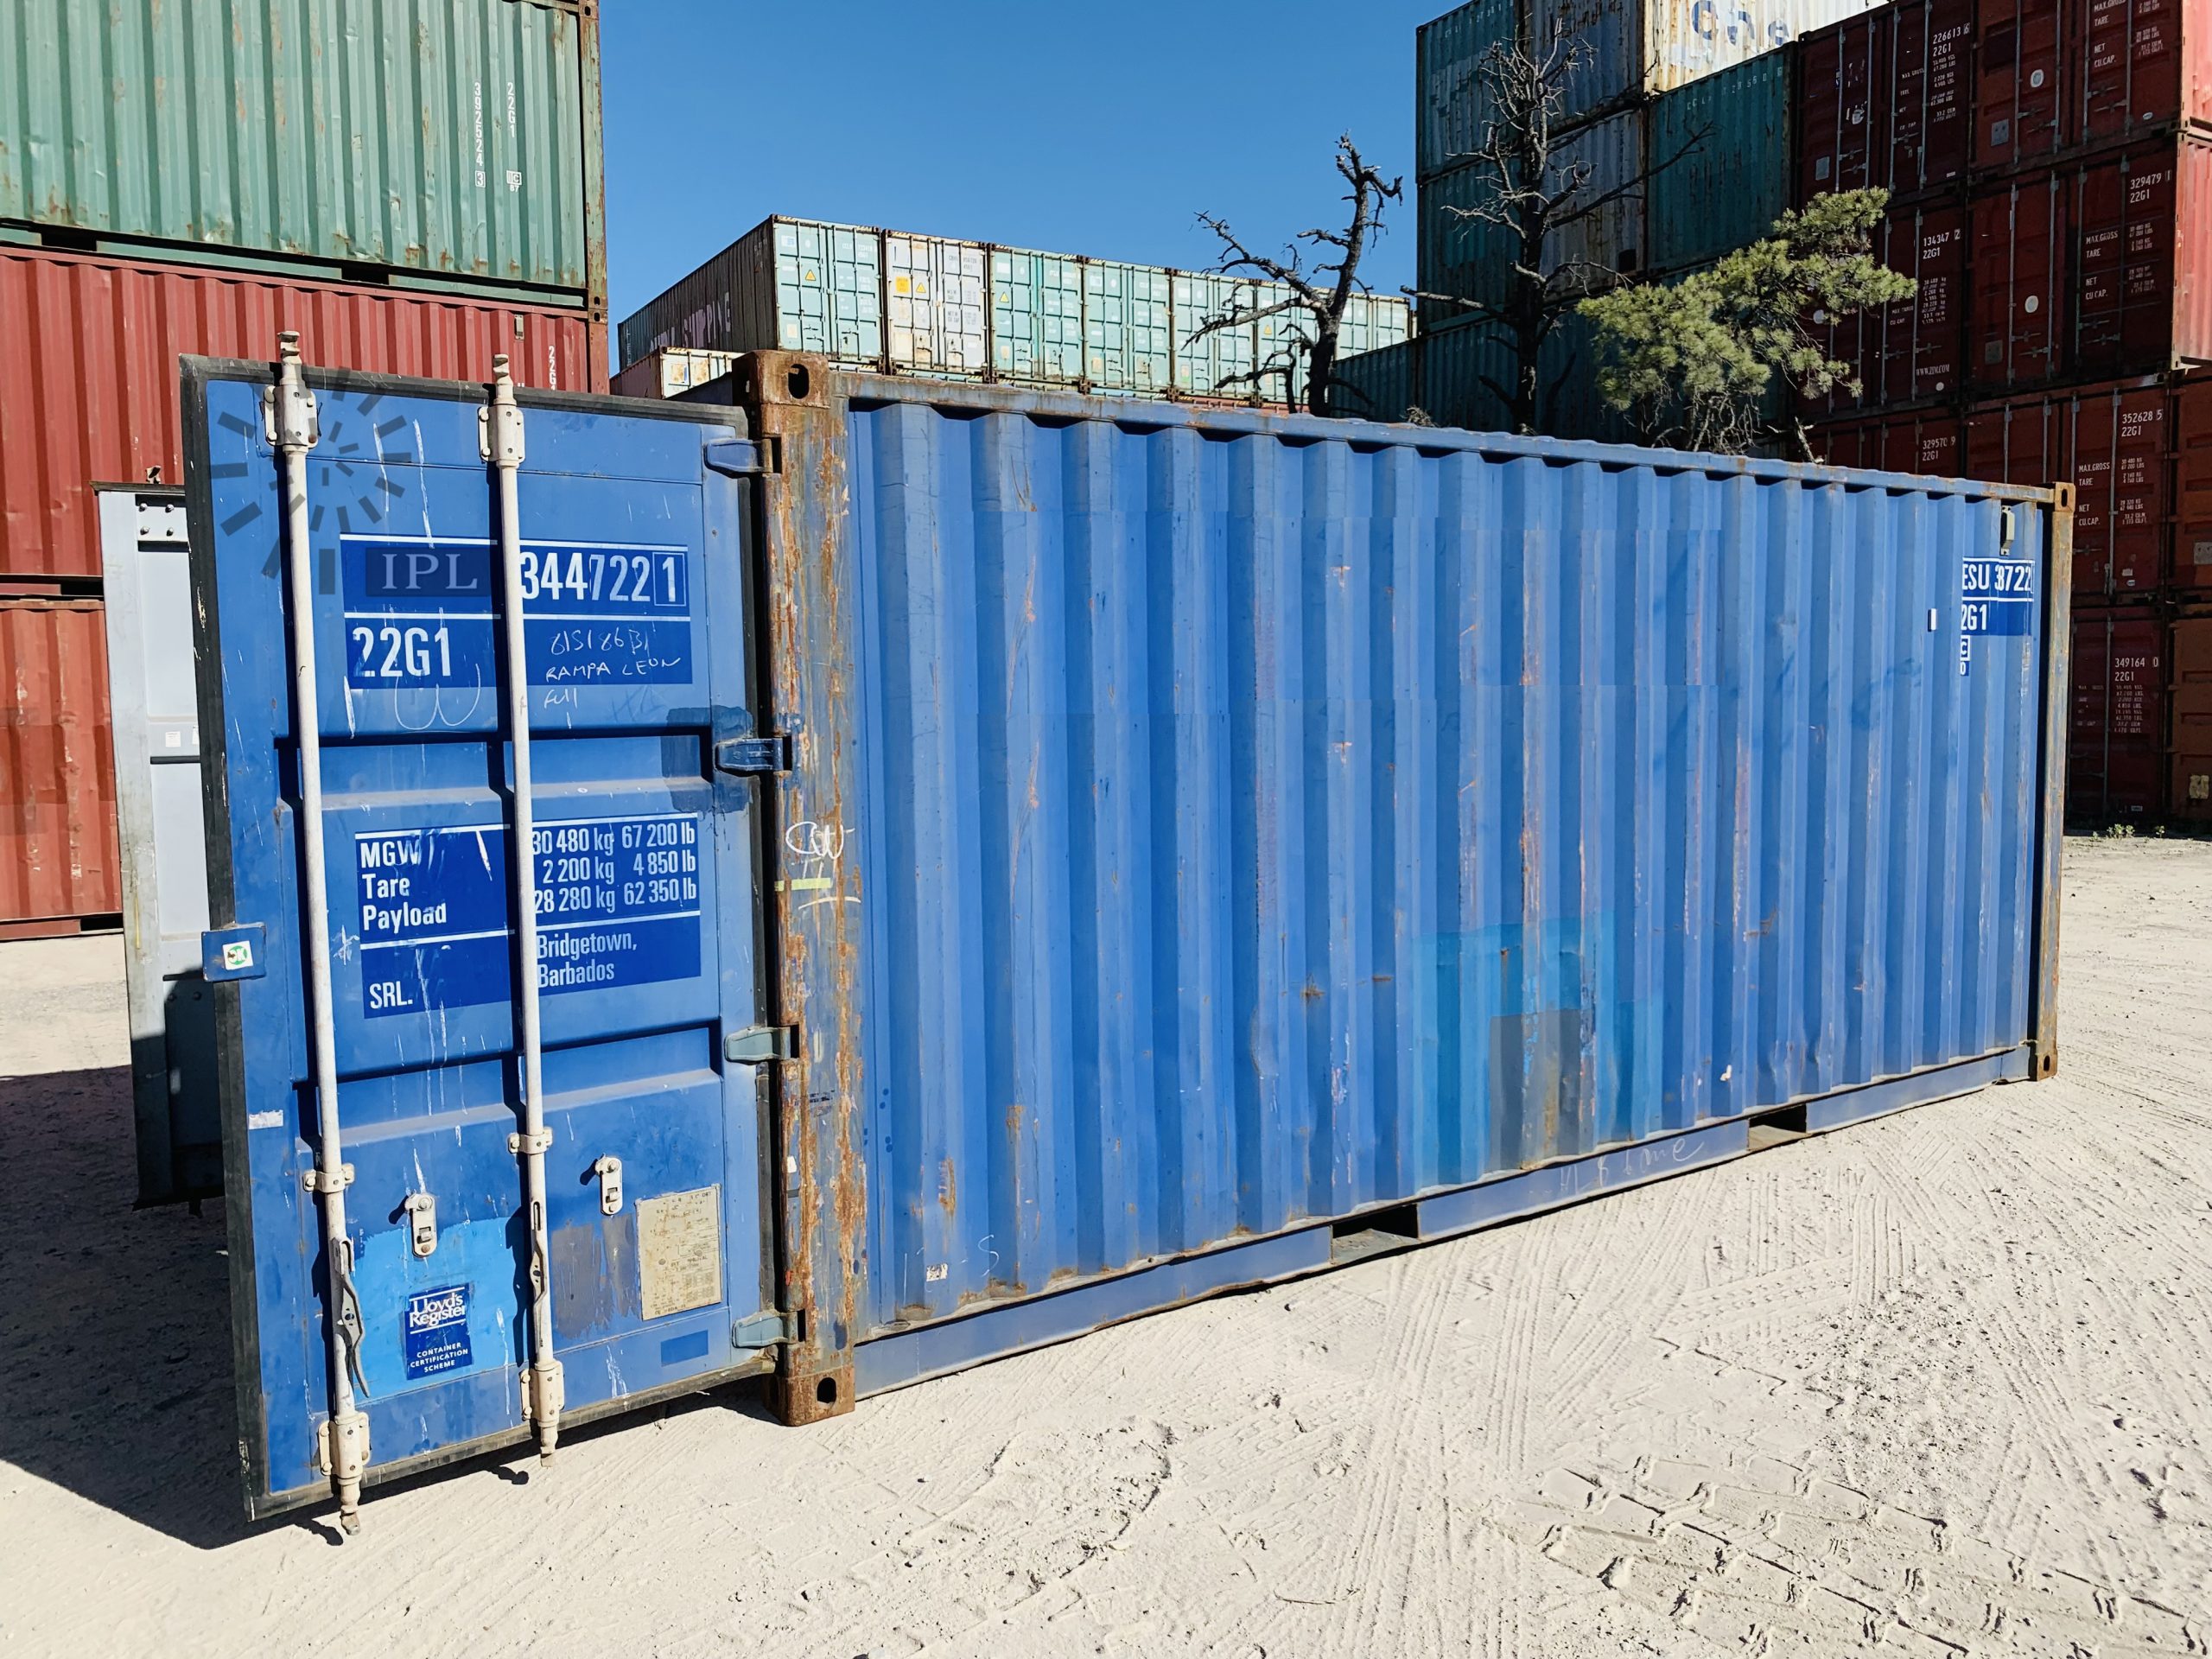 Exporting SOC Shipper Owned Containers for Sale